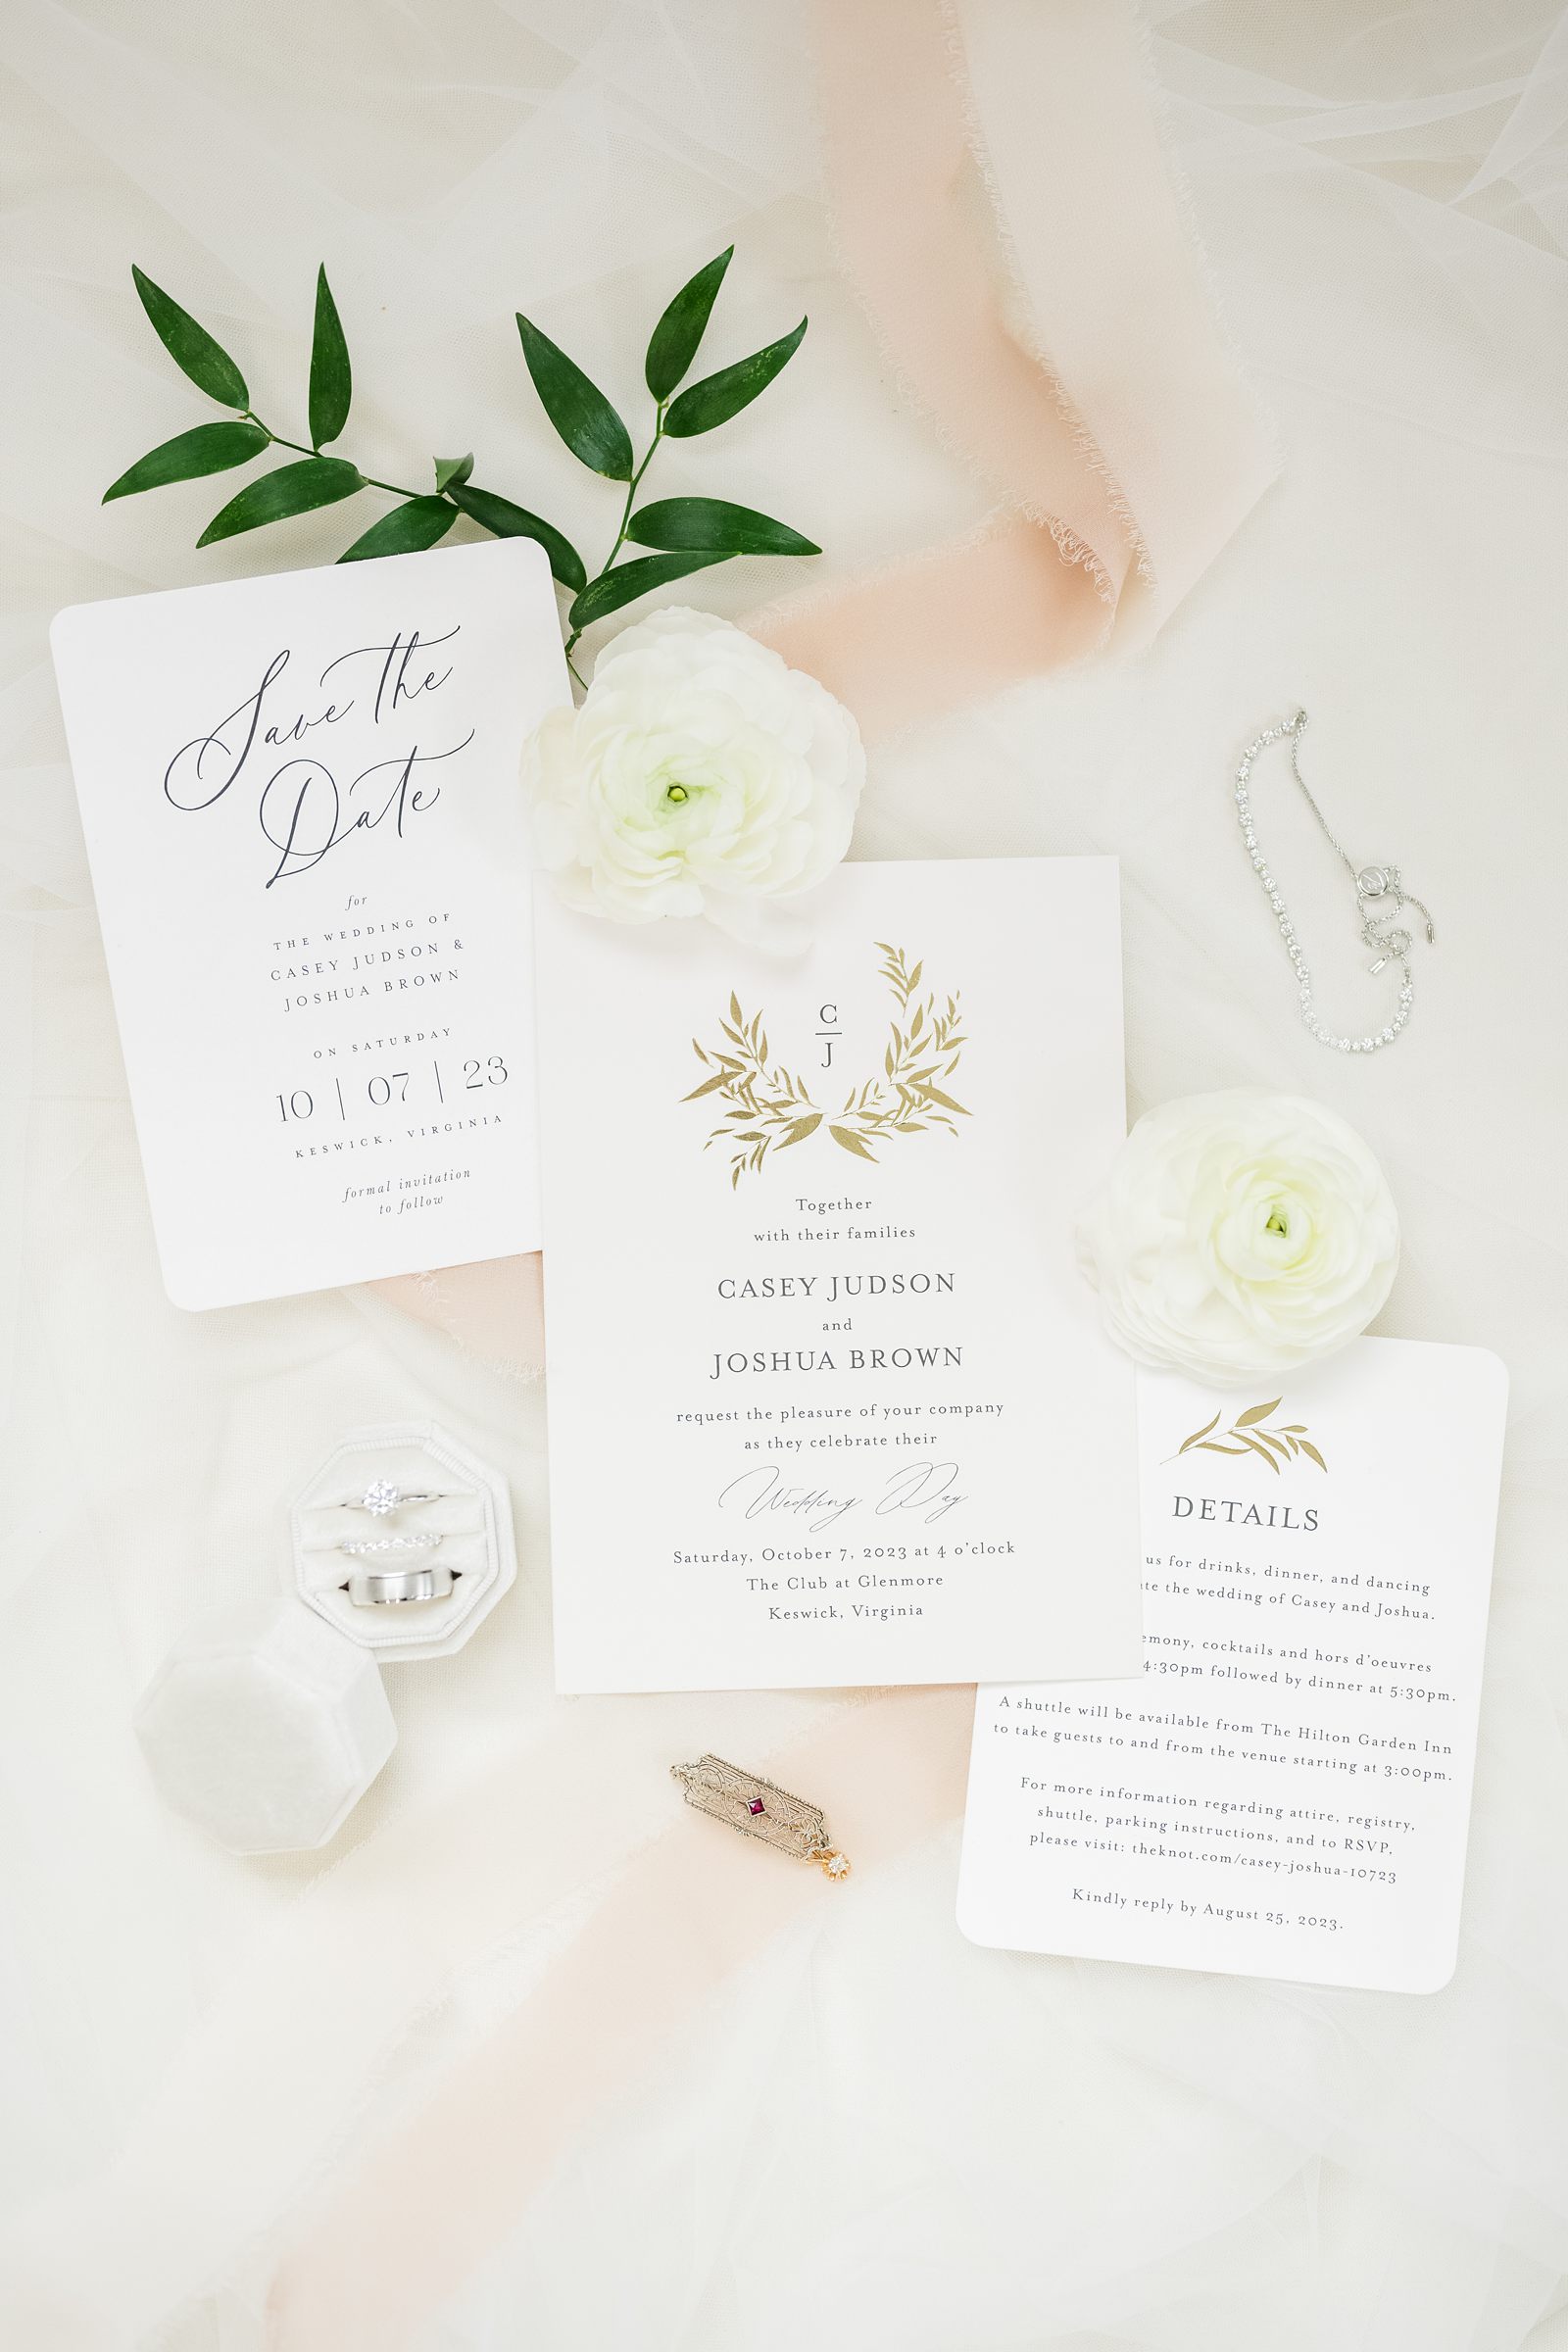 Bridal Details and Invitation Suite at fall club at glenmore wedding 